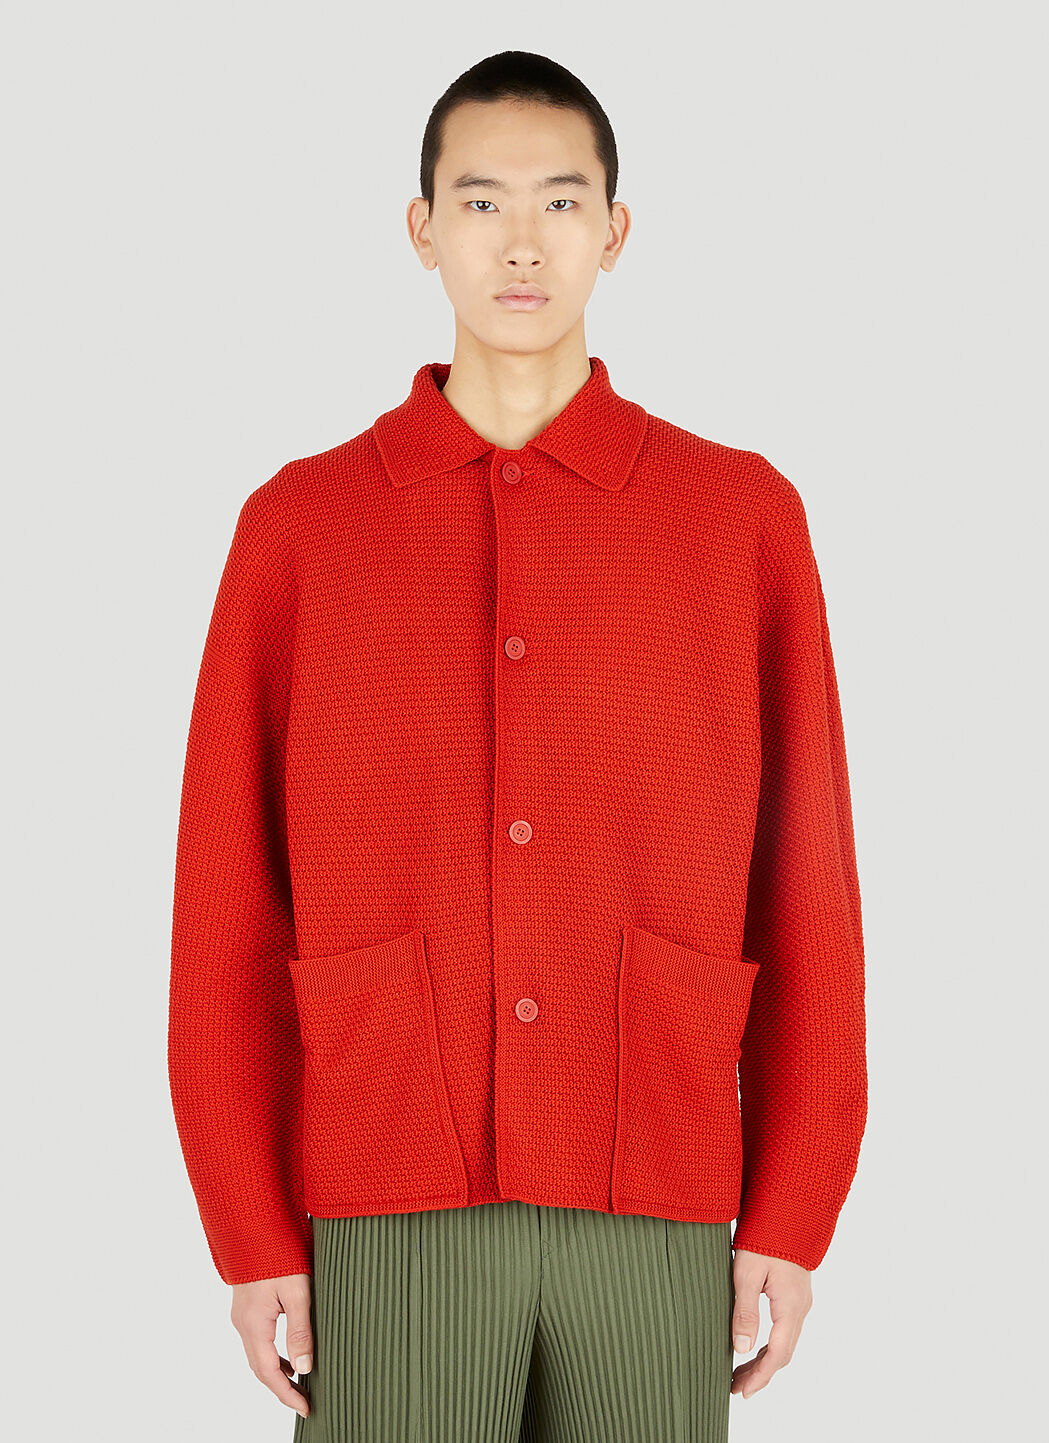 Homme Plissé Issey Miyake Men's Rustic Knit Jacket in Red | LN-CC®